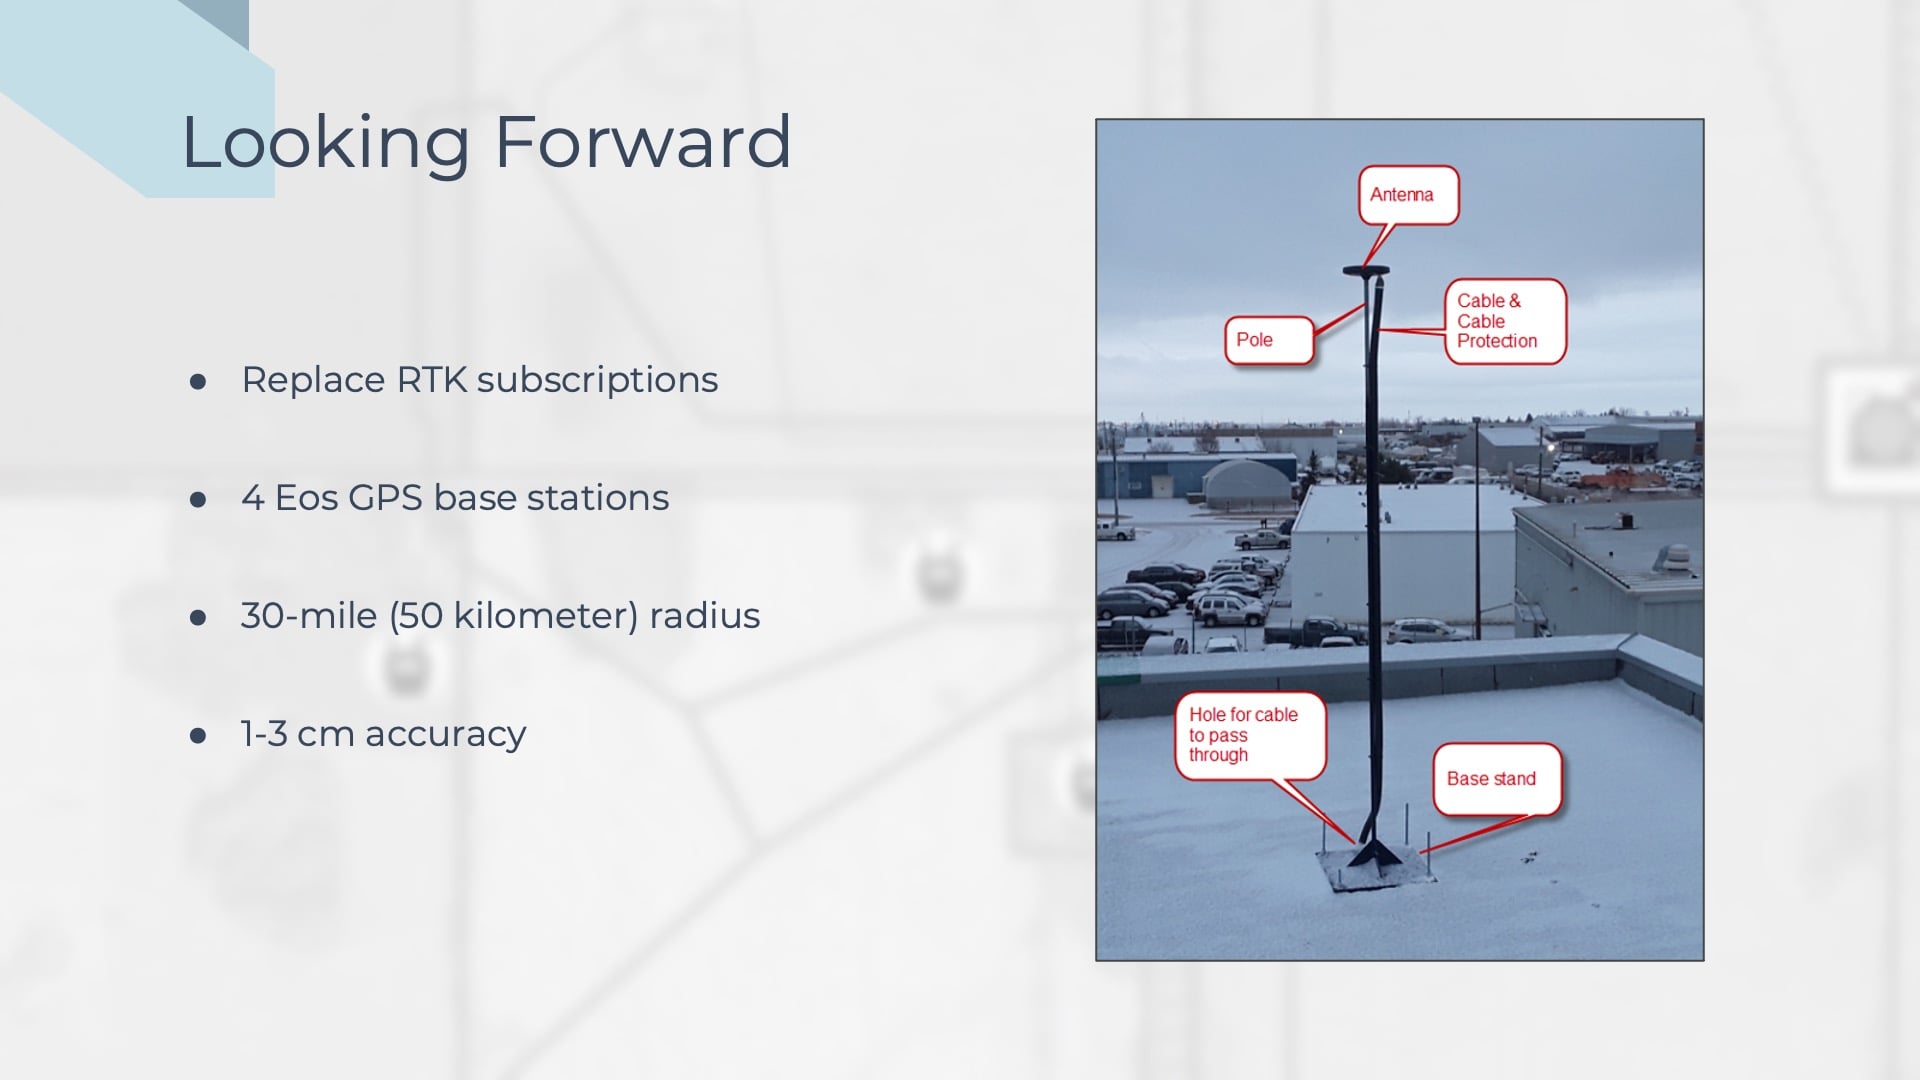 This slide, titled "Looking Forward," reviews the goals Apex Utilities wants to achieve in the future. Apex Utilities aims to eliminate all its annual RTK network subscription costs (charged per user) by installing its own Arrow Gold base stations. A photo of one is displayed on the right, installed on the roof of a building.